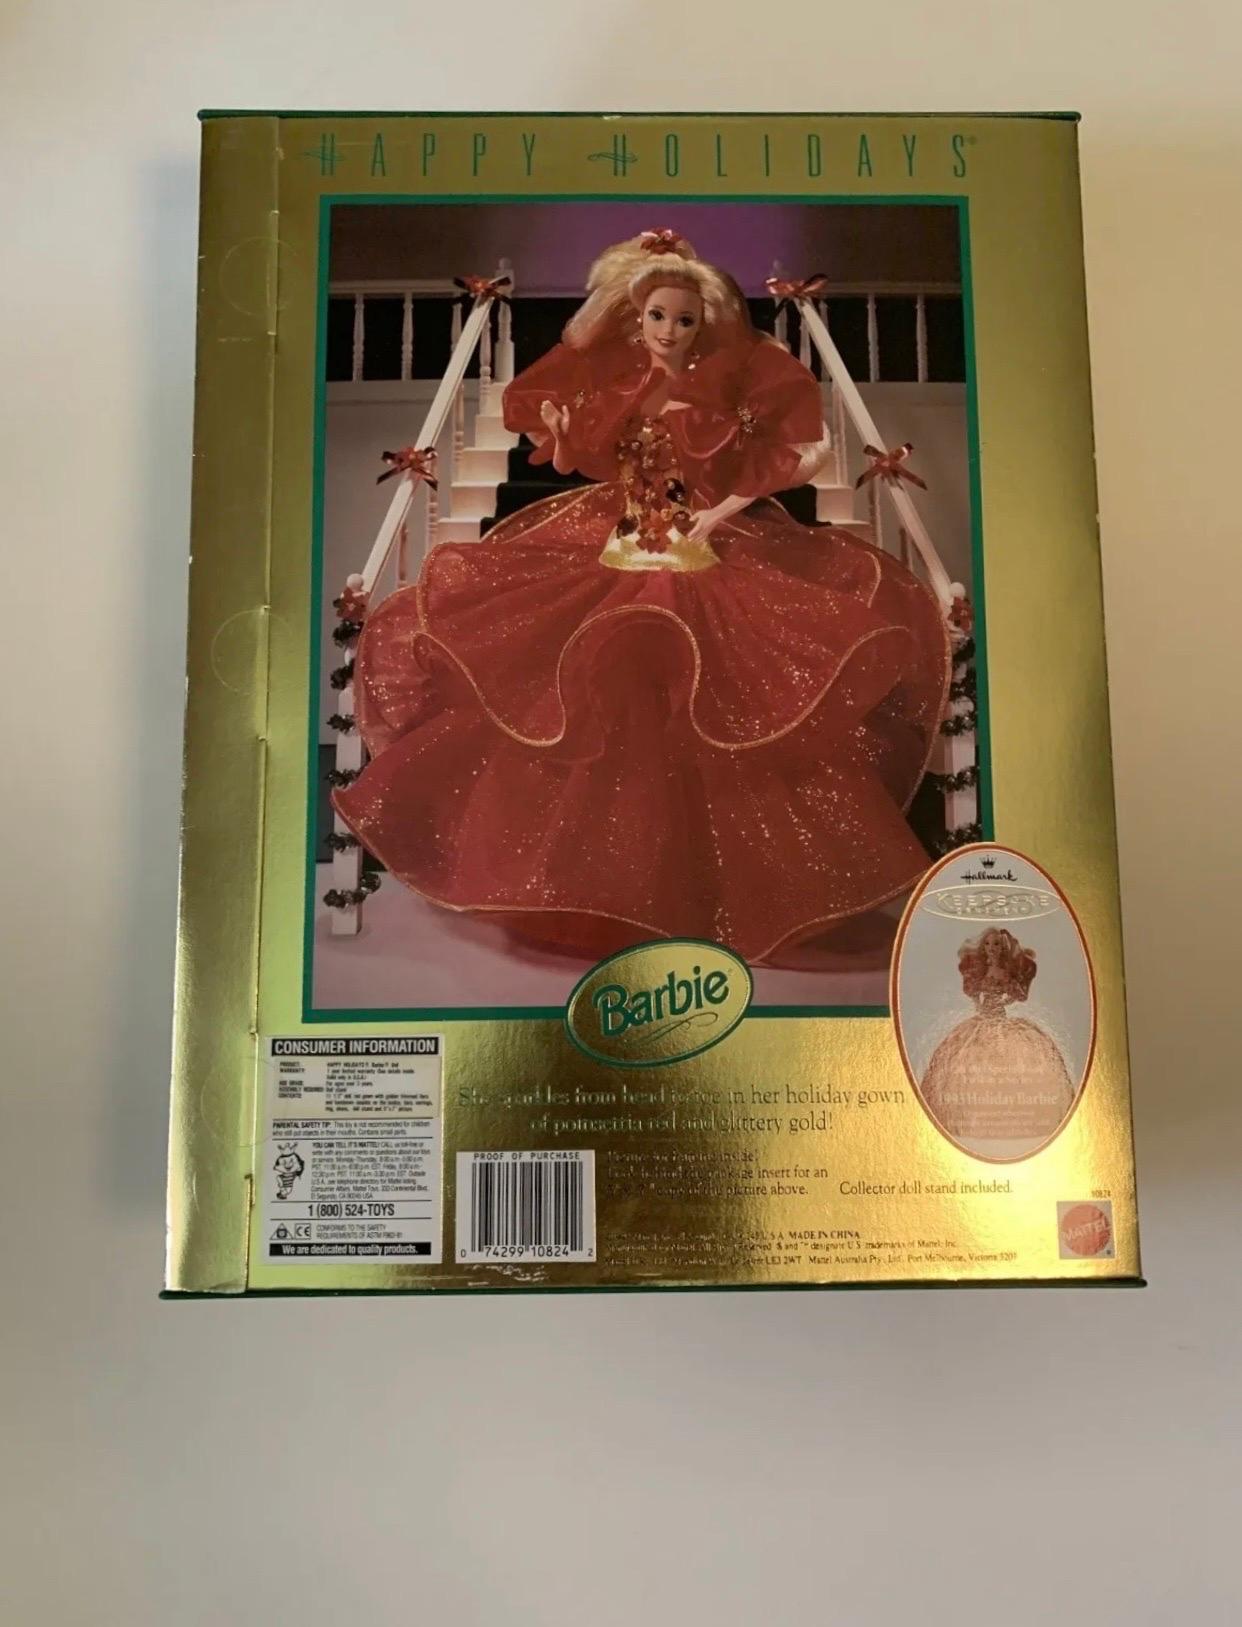 Special edition. Mattel, happy holidays special edition Barbie. 1993.
Doll is featured in her red gown and long, blond tresses. 
Includes box.